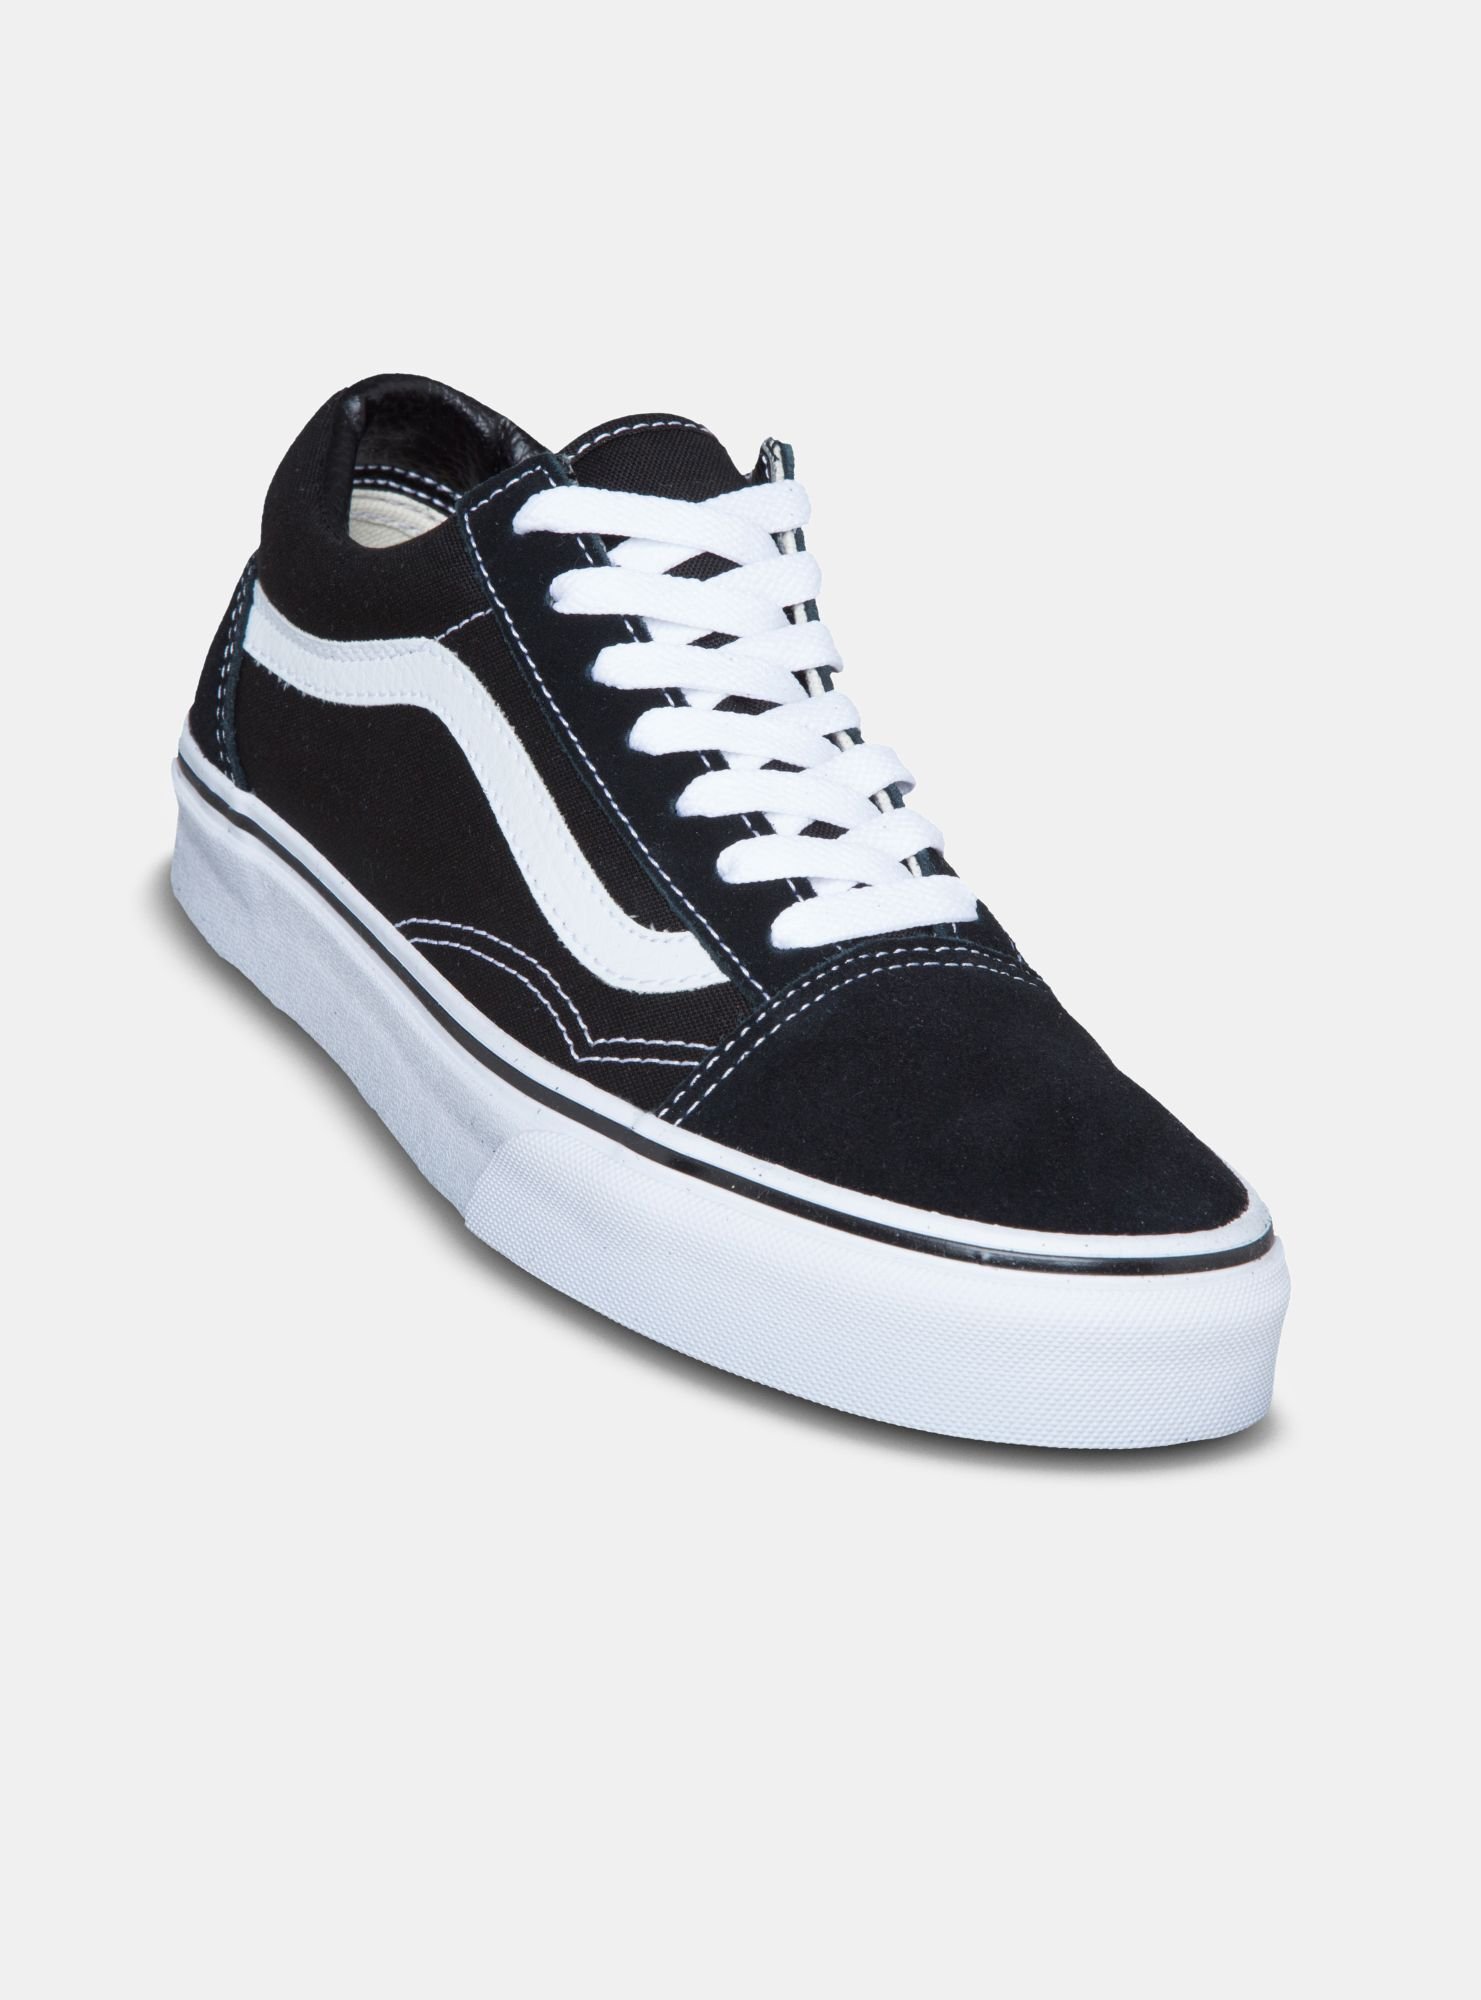 zapatos vans chile df,Limited Time Offer,avarolkar.in